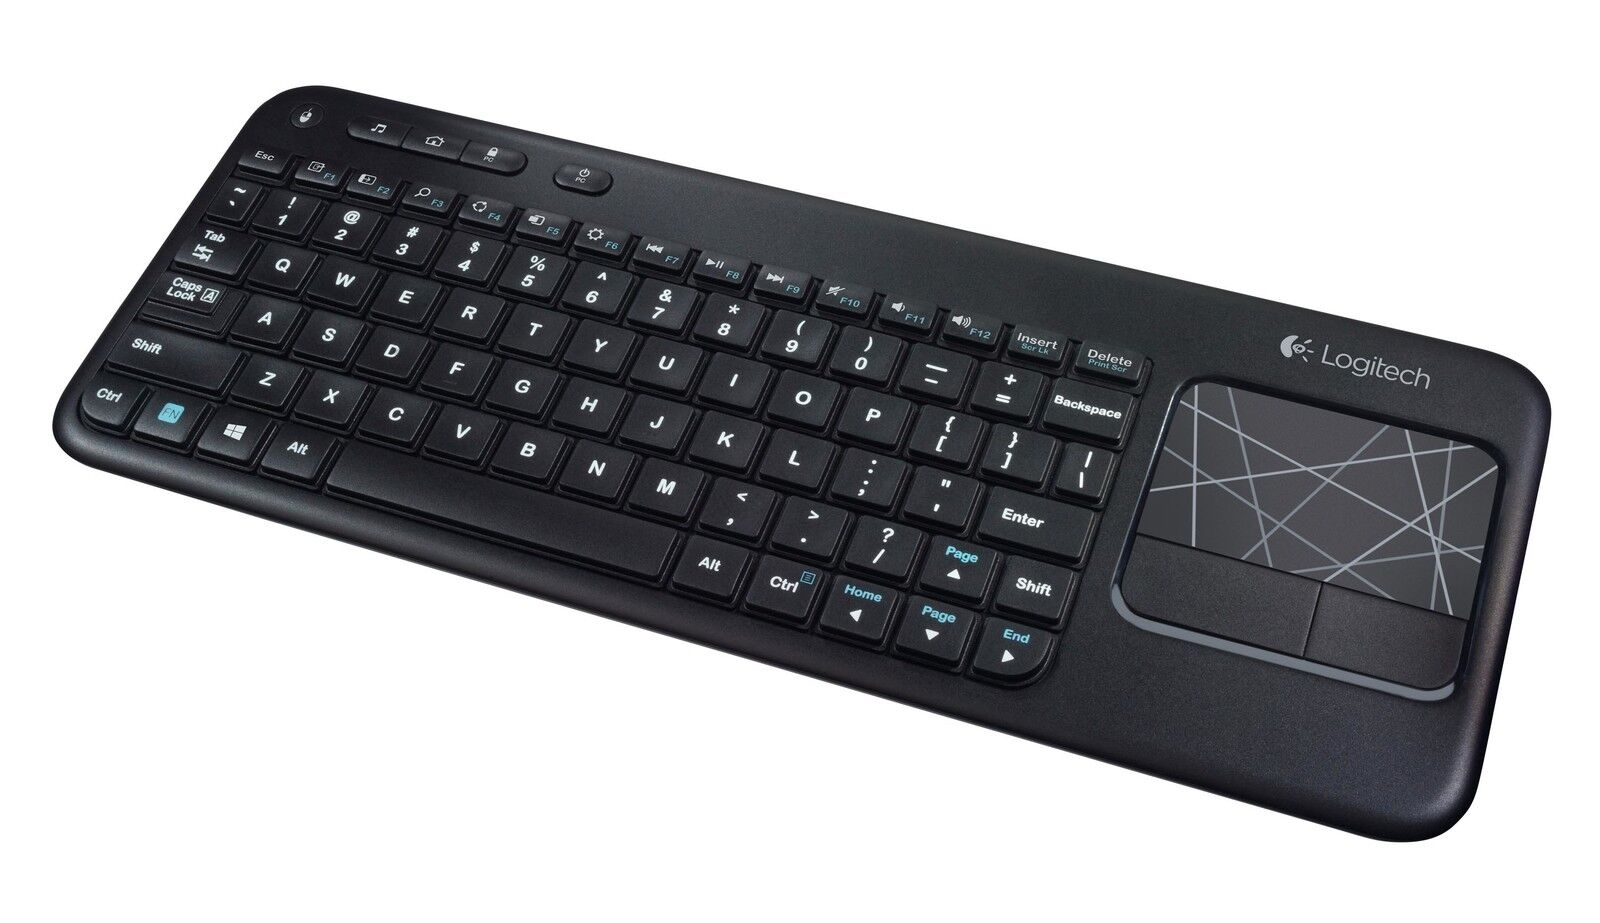  Logitech K400 Wireless Touch Keyboard with Built-In Multi-Touch Touchpad